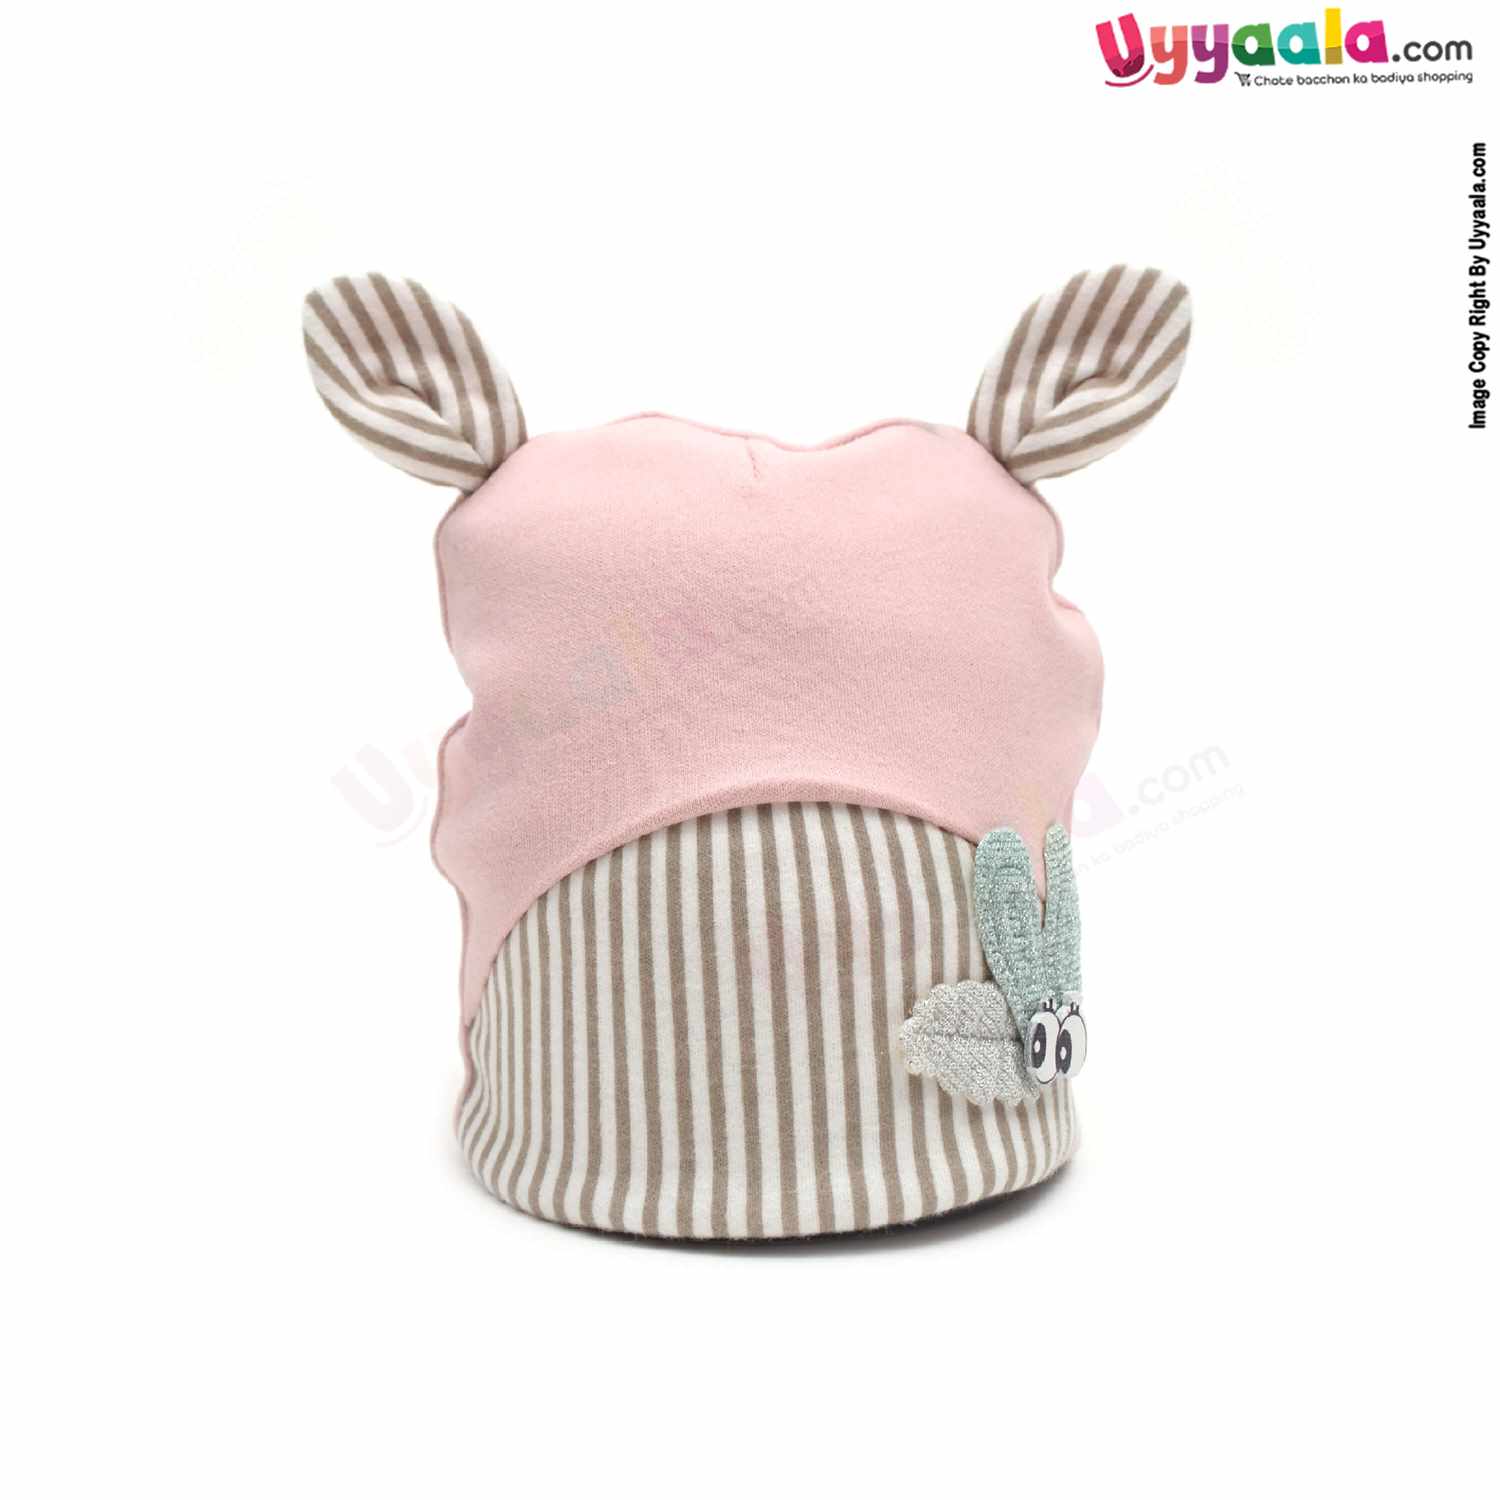 Fancy Round Cap for Babies with Stretchable Soft Hosiery Material, Bee Patch,0-12m Age - Peach